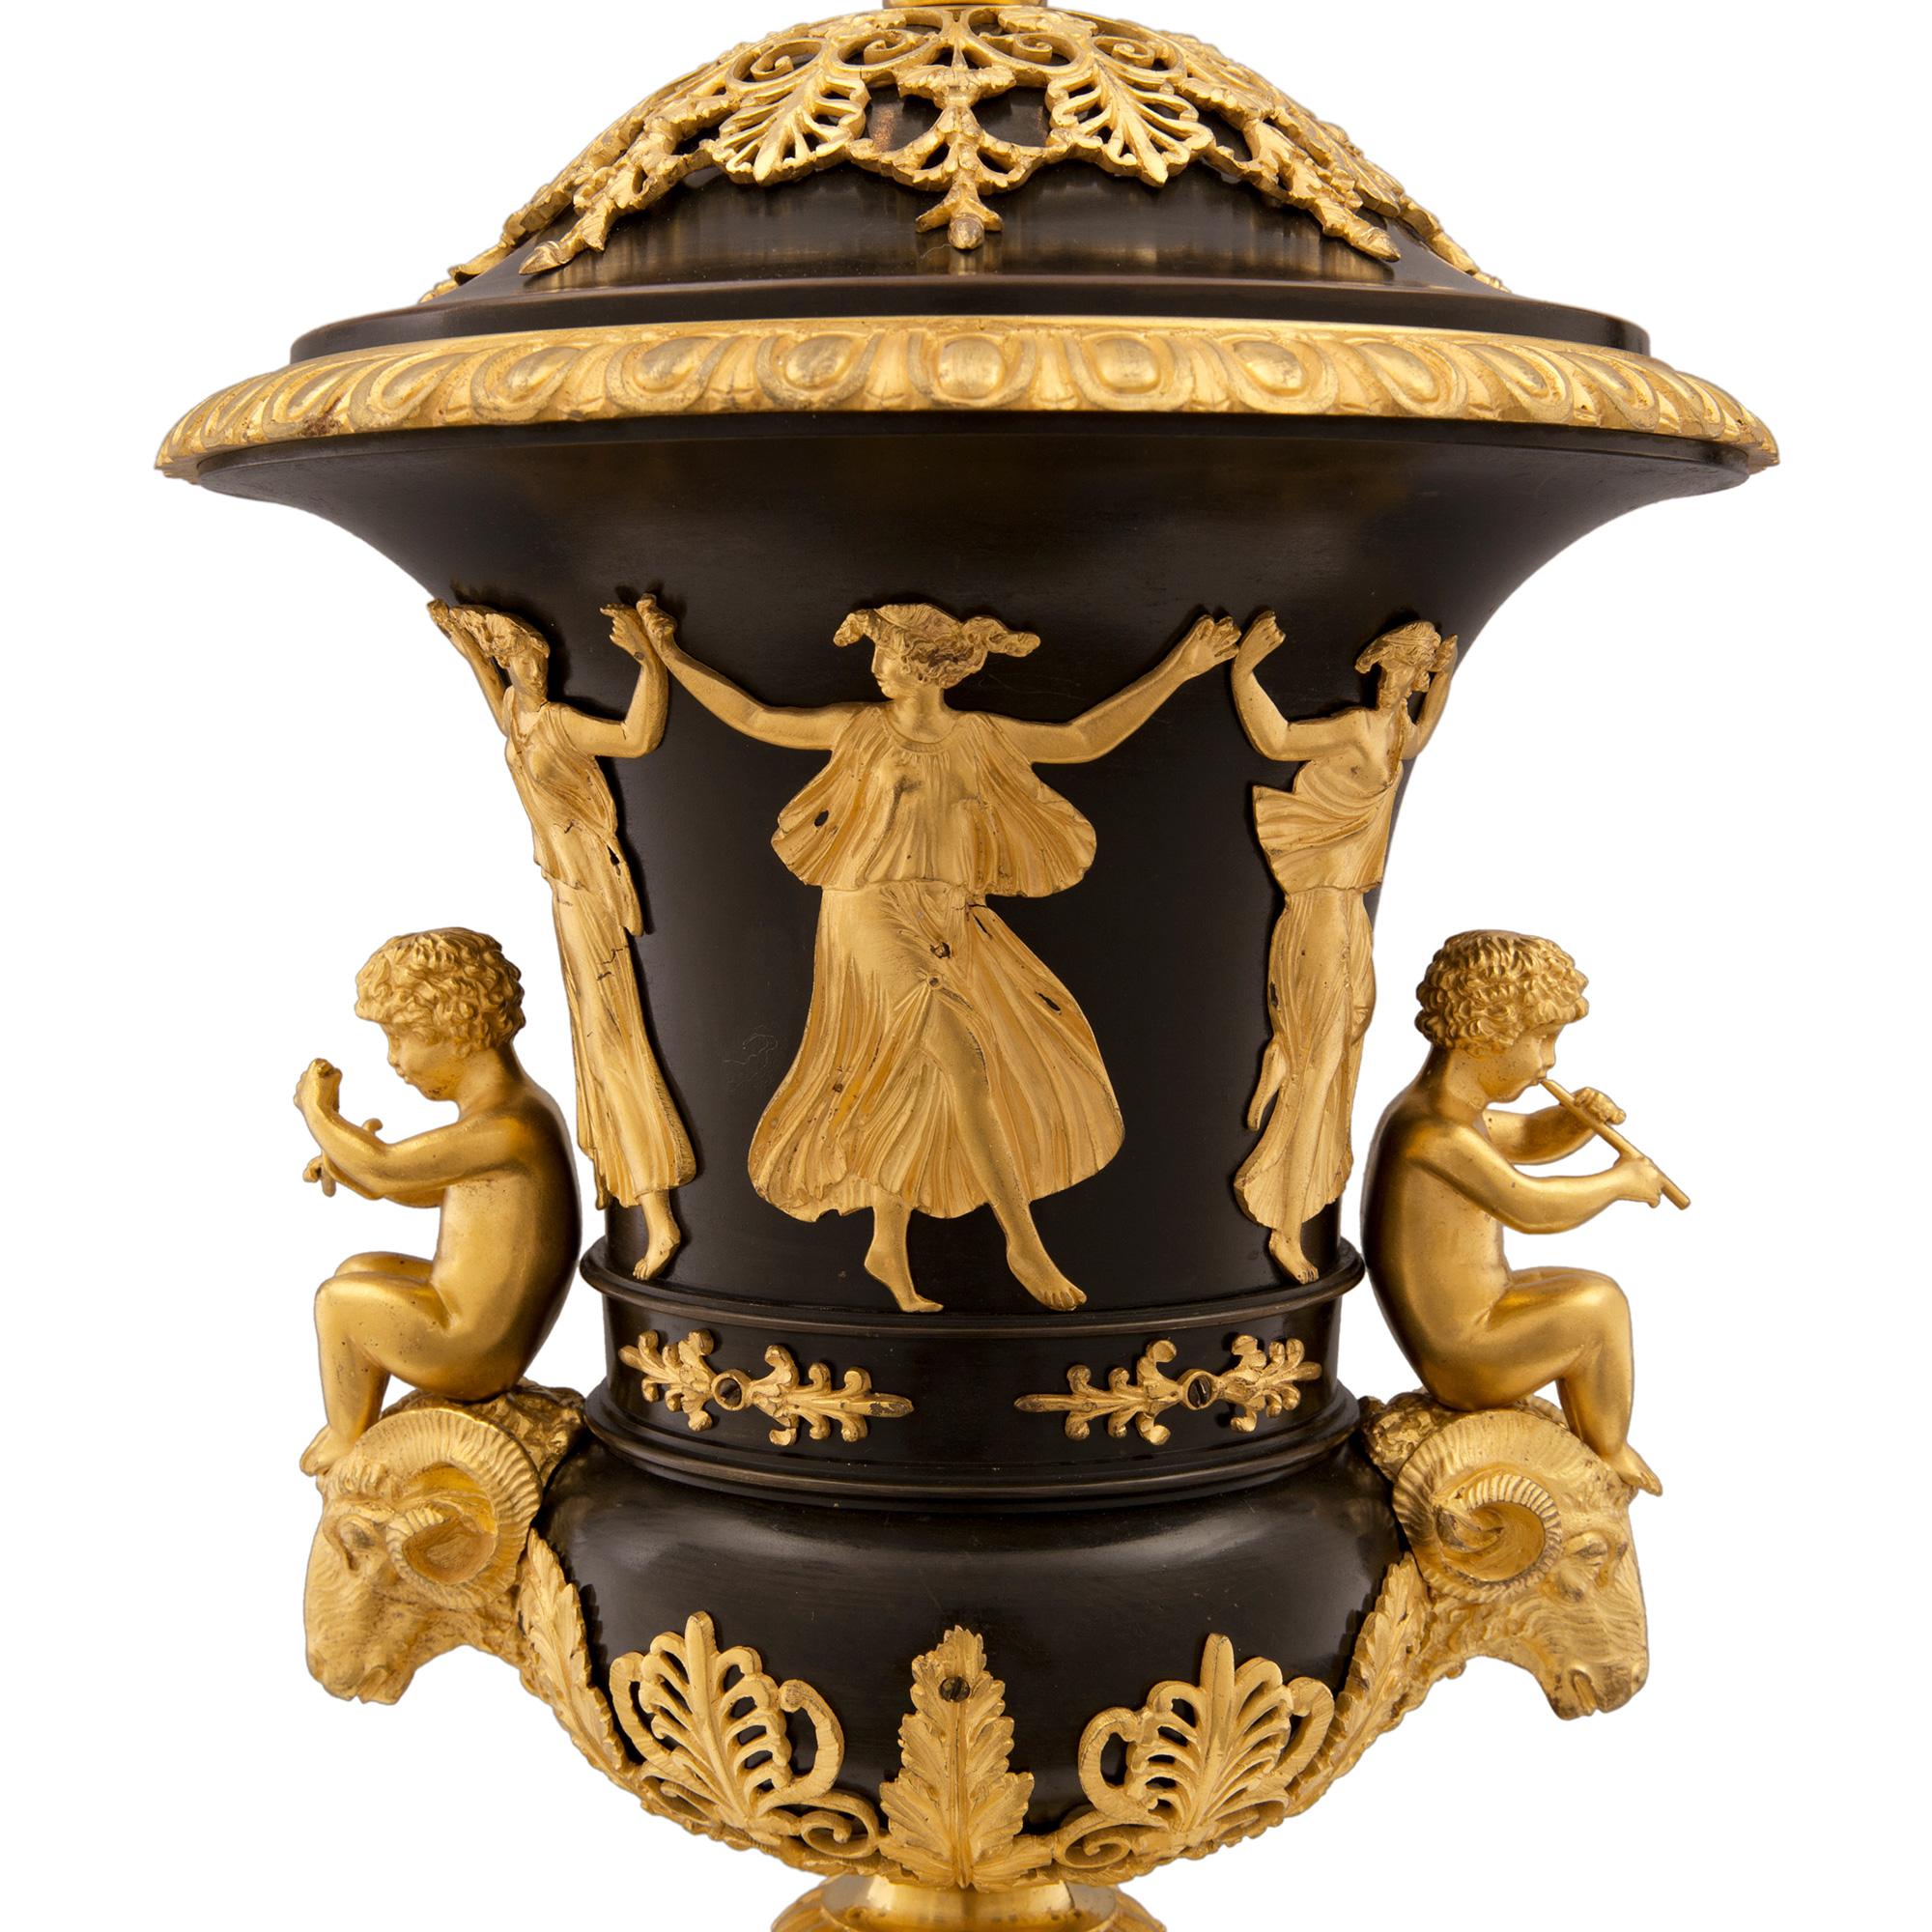 French 19th Century Neoclassical Style Bronze and Ormolu Lamp In Good Condition For Sale In West Palm Beach, FL